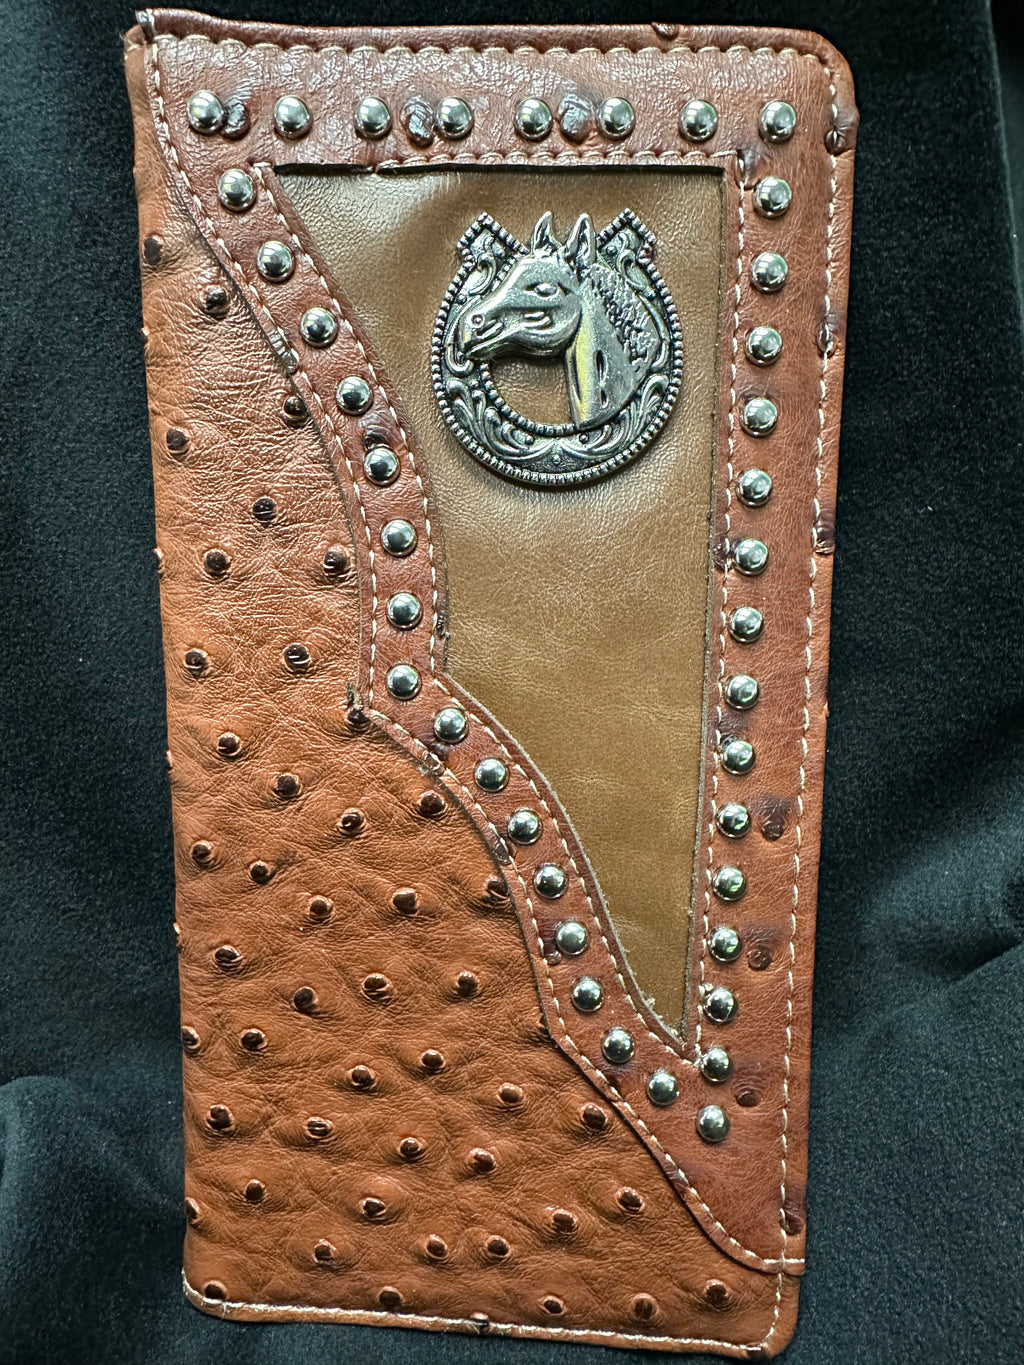 MENS WESTERN WALLET HORSE WITH HORSESHOE CONCHO OR UNISEX CHECK BOOK WALLET - Lil Monkey Boutique